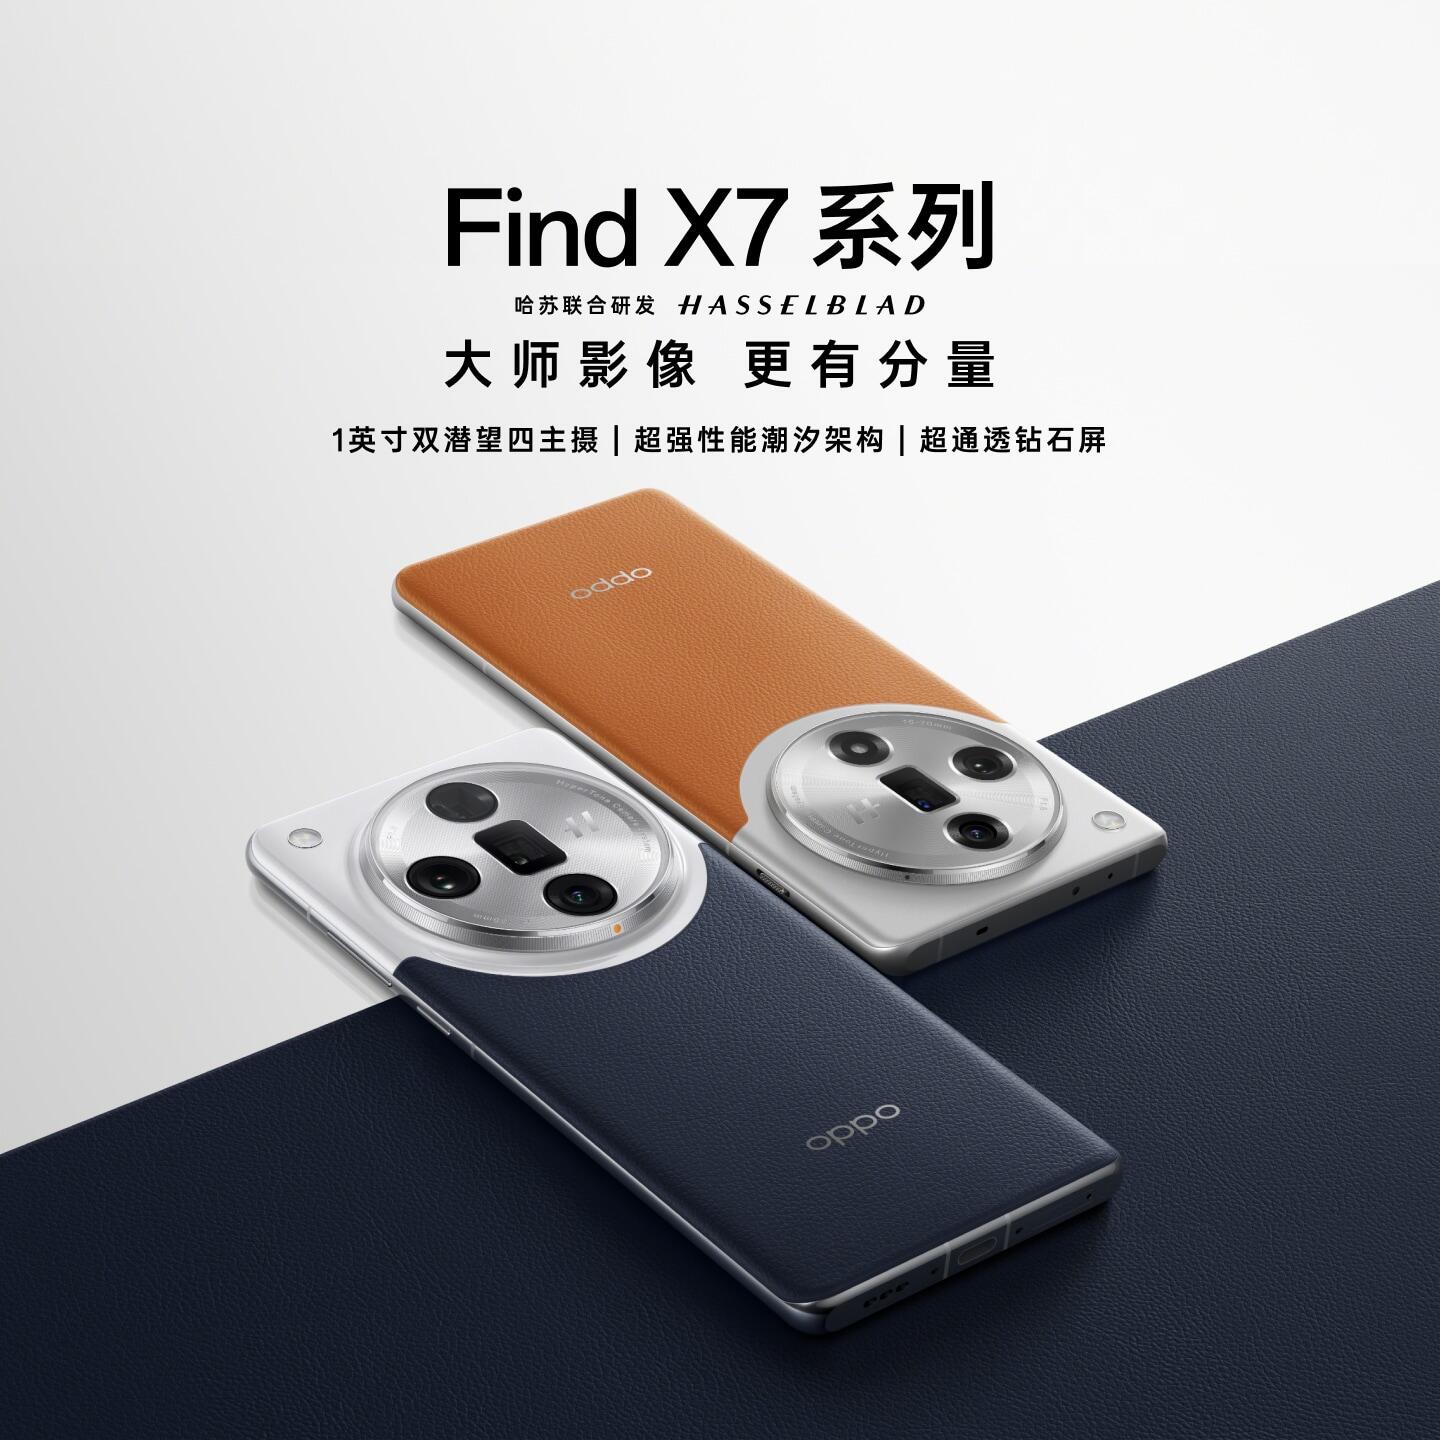 Oppo teases the Find X7 and Find X7 Ultra, set to launch in China